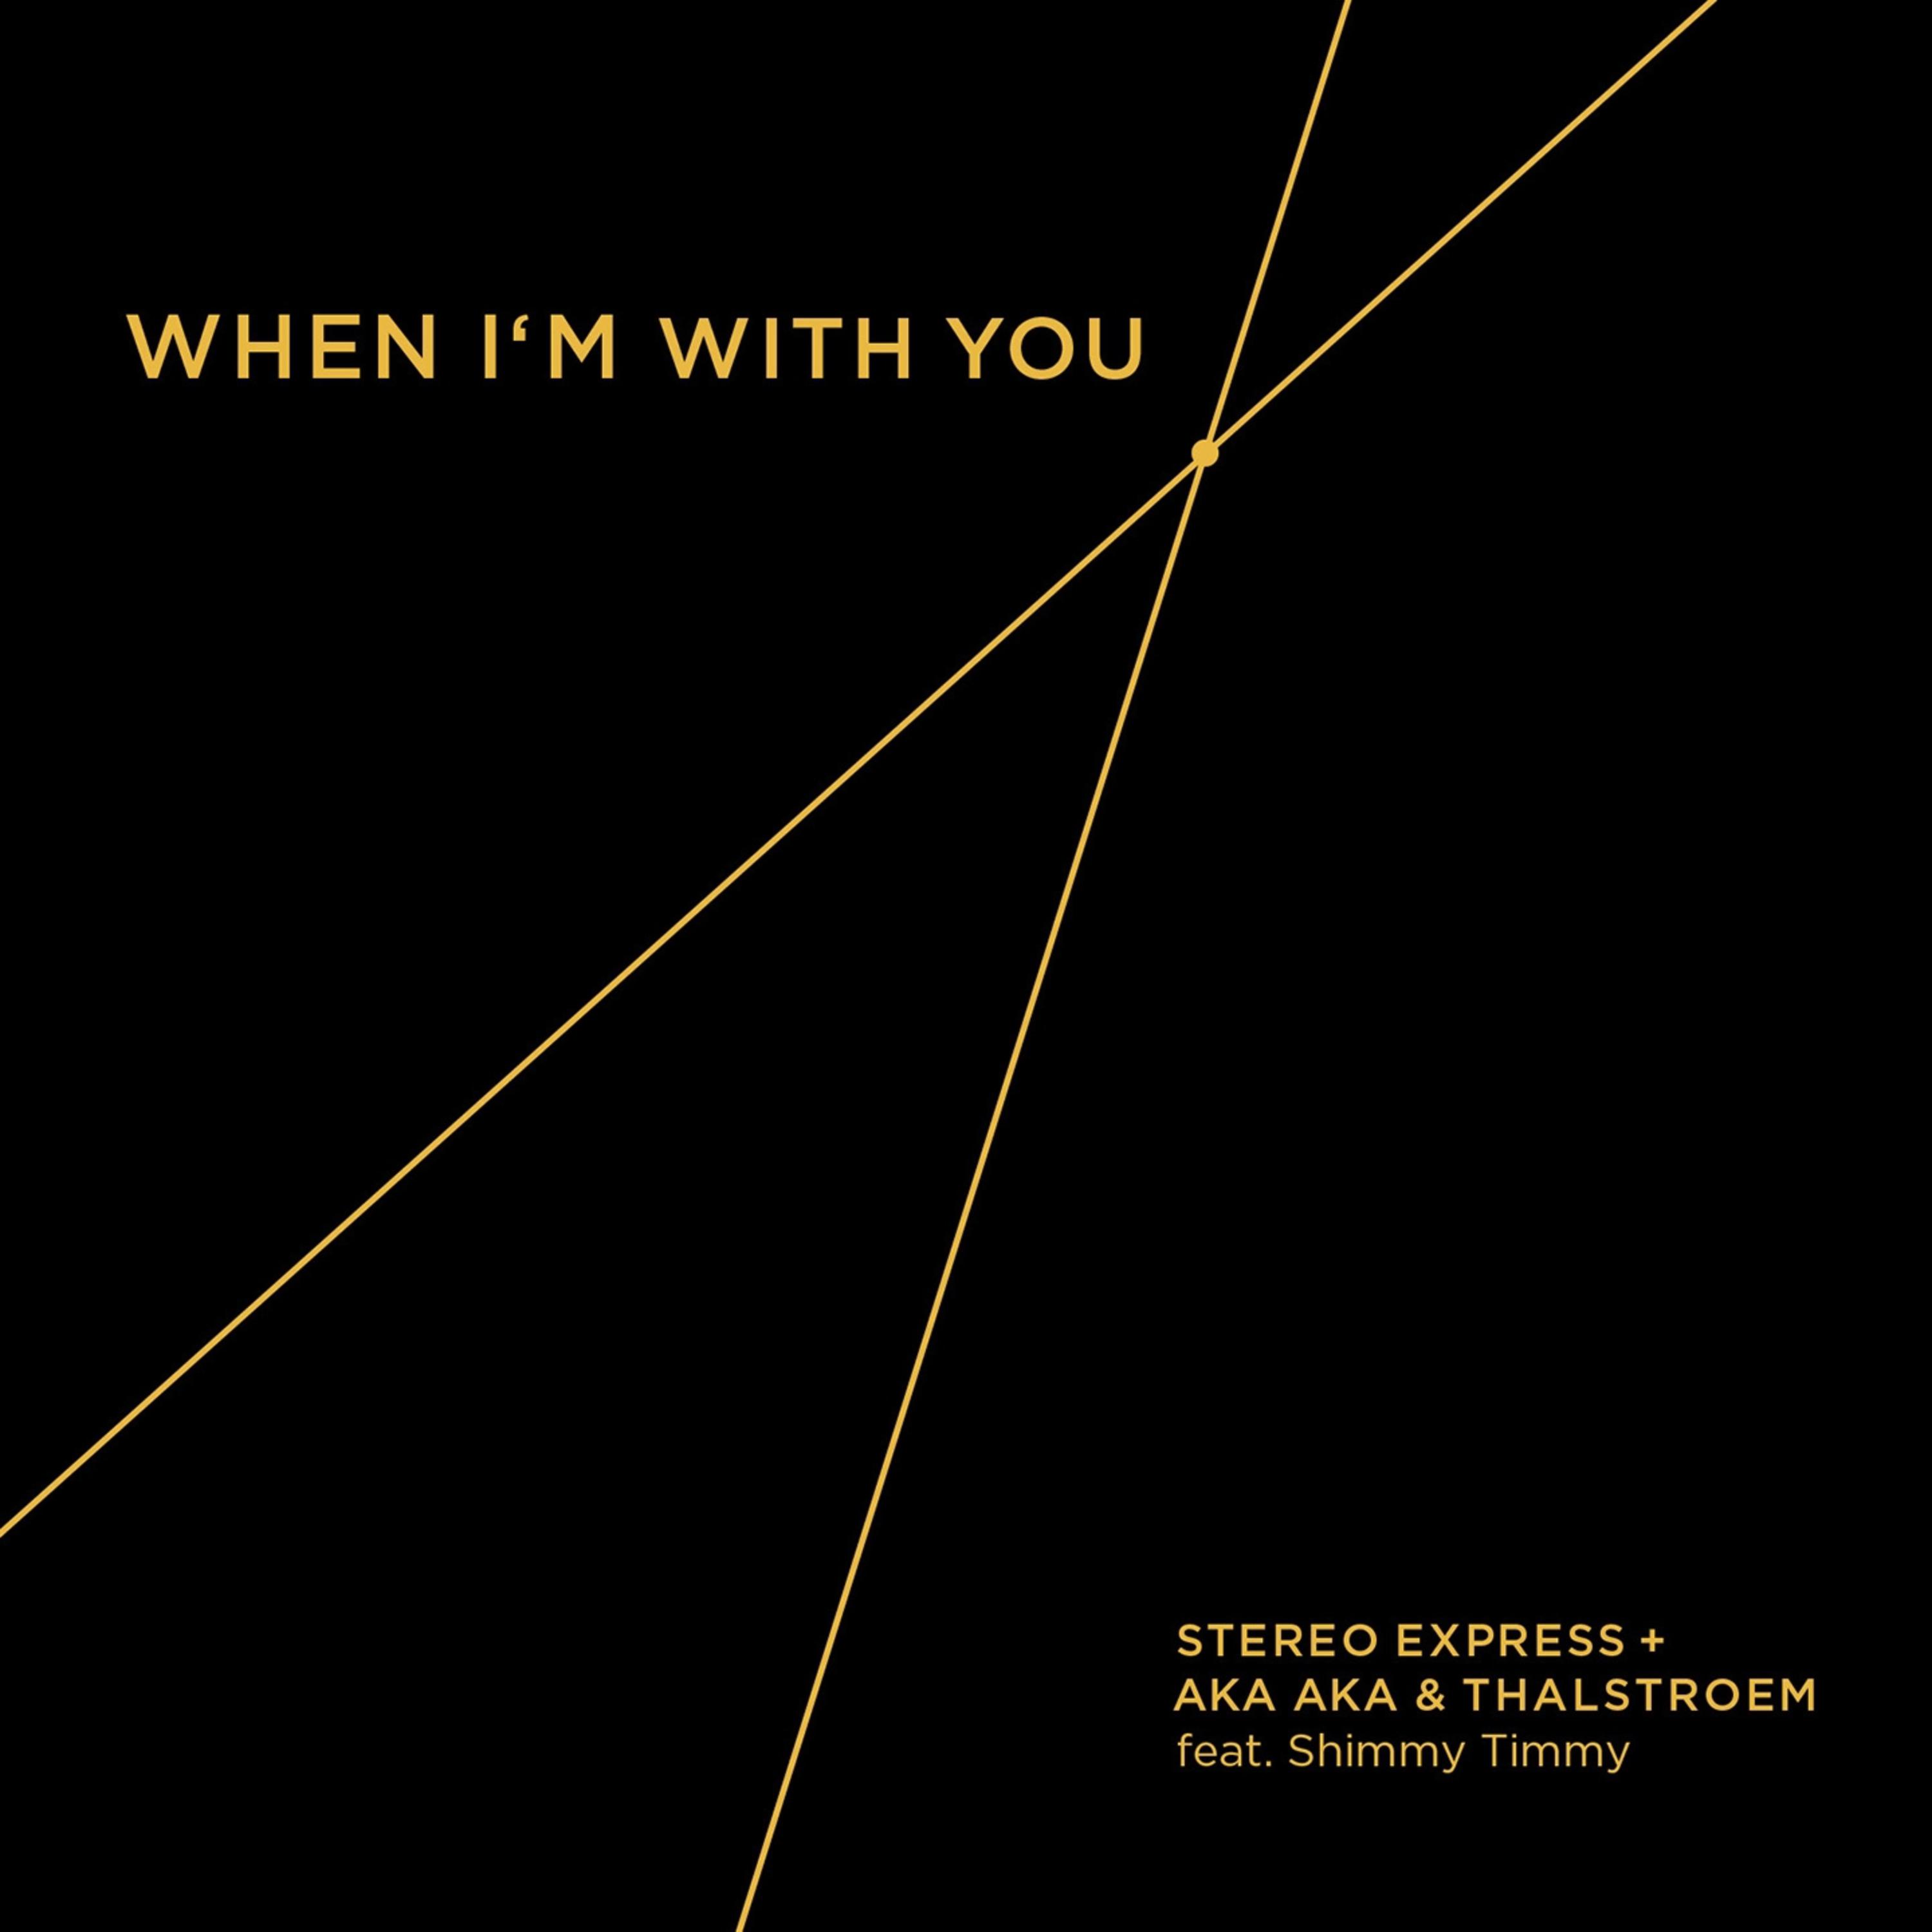 When I'm with You EP feat. Shimmy Timmy